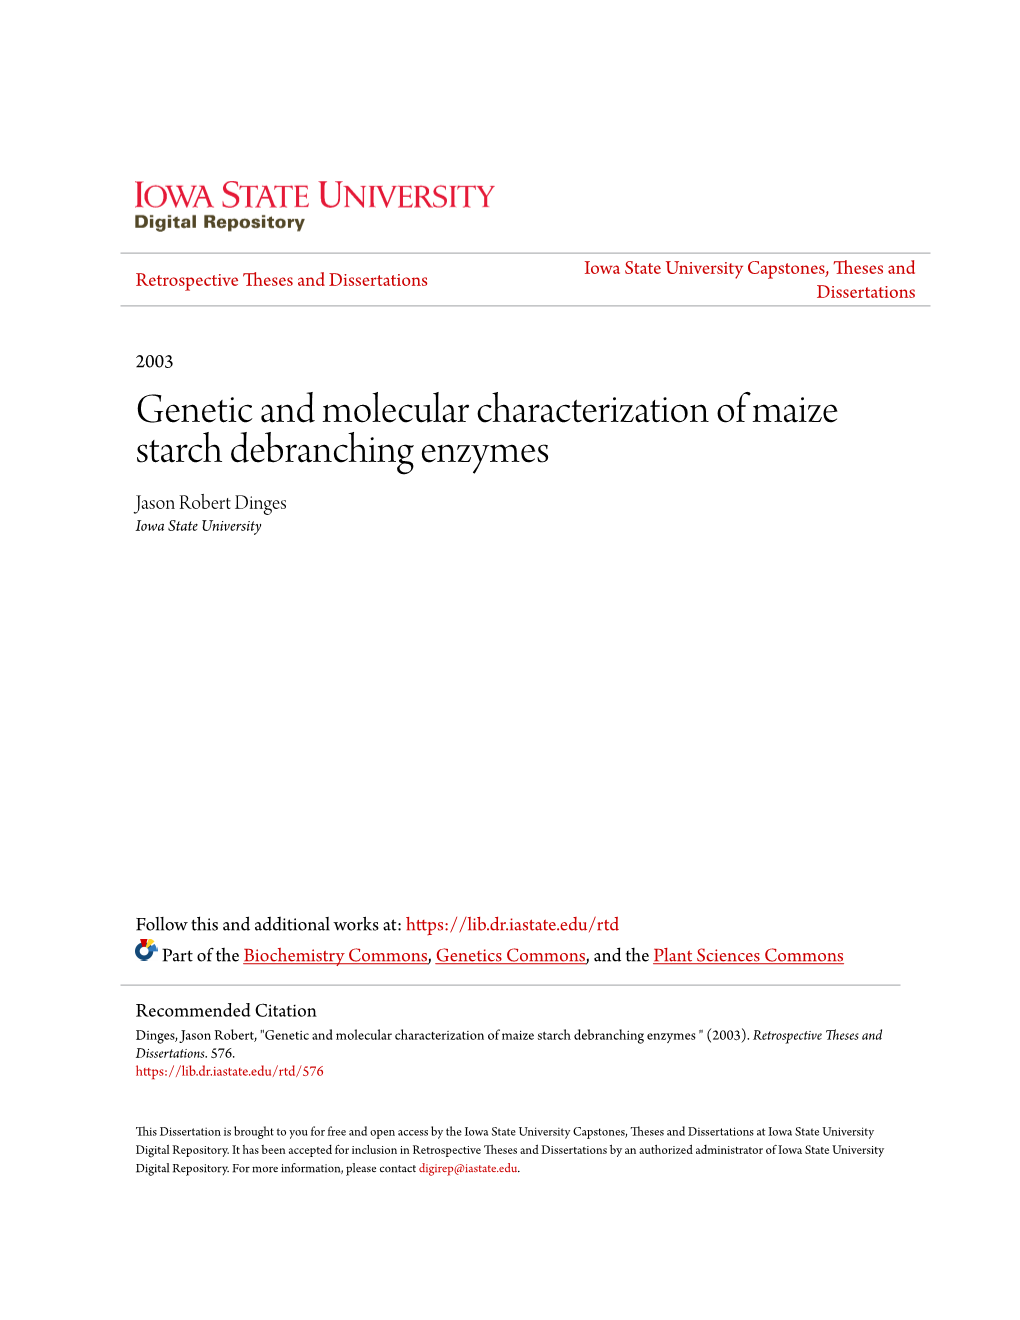 Genetic and Molecular Characterization of Maize Starch Debranching Enzymes Jason Robert Dinges Iowa State University